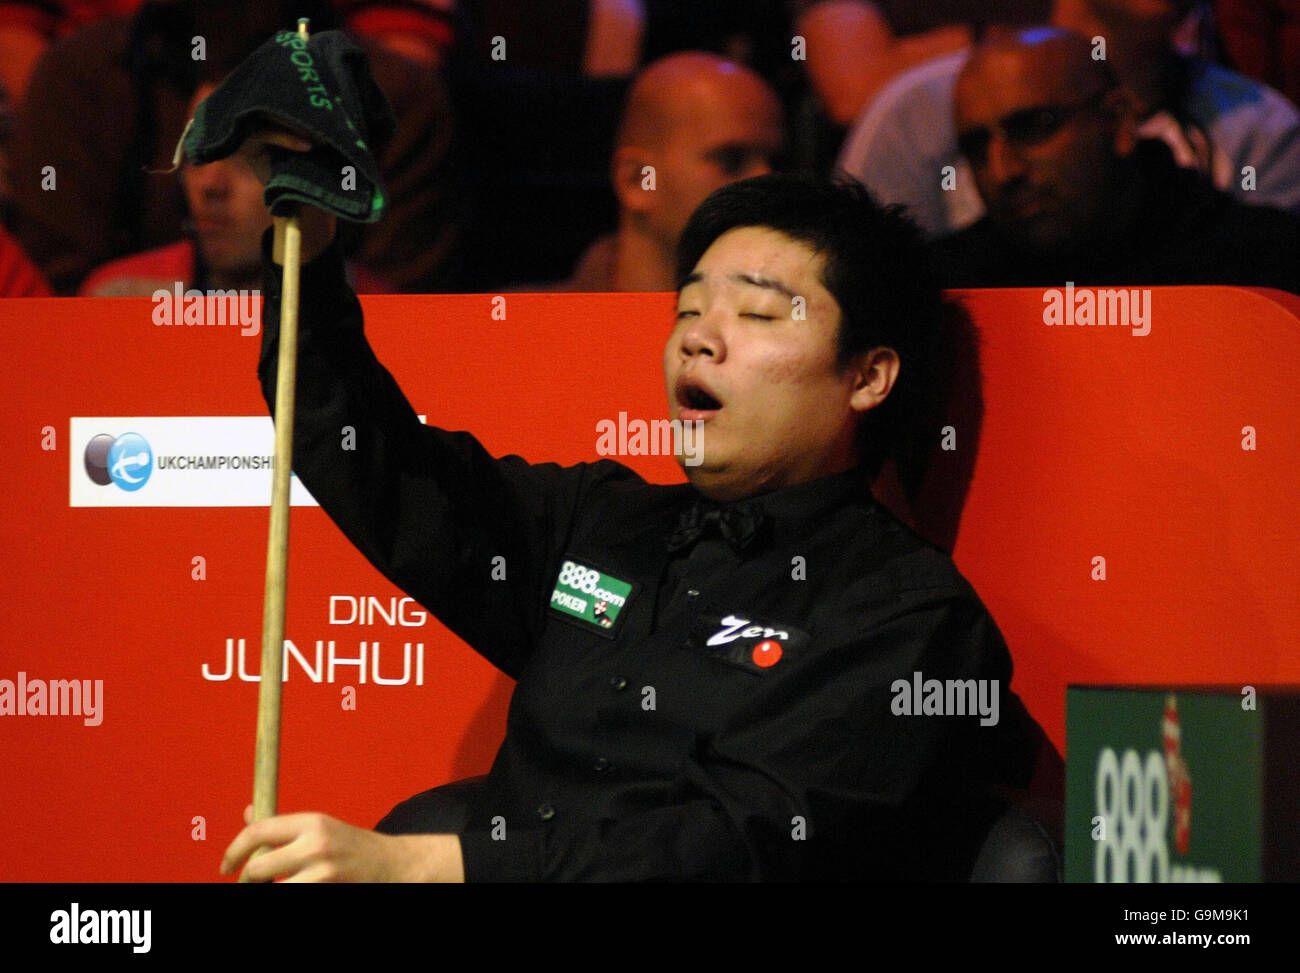 Current UK Snooker Champion Ding Junhui struggles to awake during his match against Ryan Day during the Maplin UK Snooker Championships the York Barbican Centre, York Stock Photo - Alamy